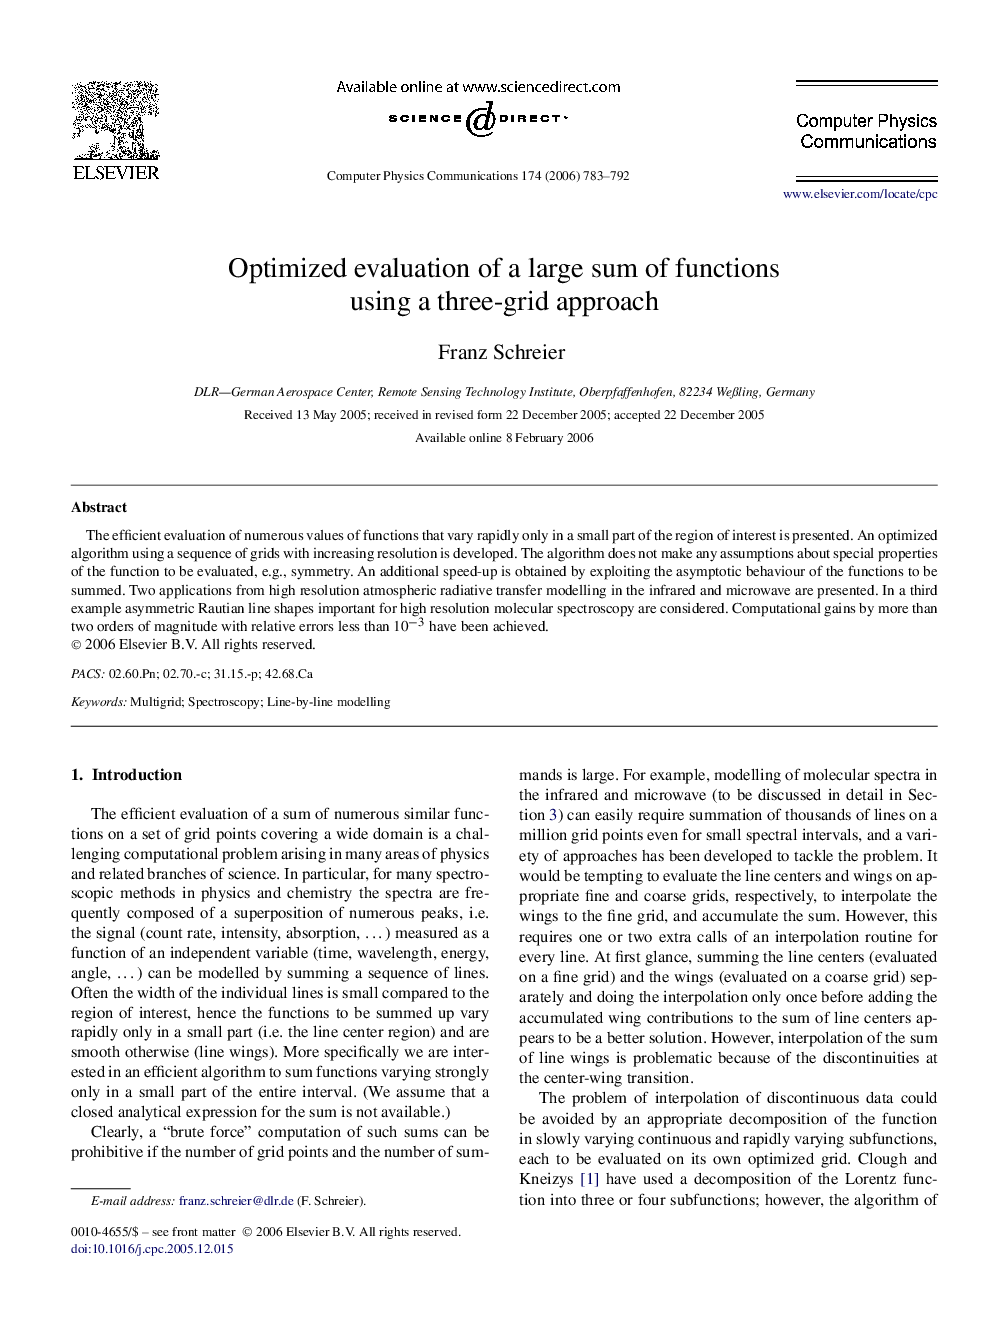 Optimized evaluation of a large sum of functions using a three-grid approach